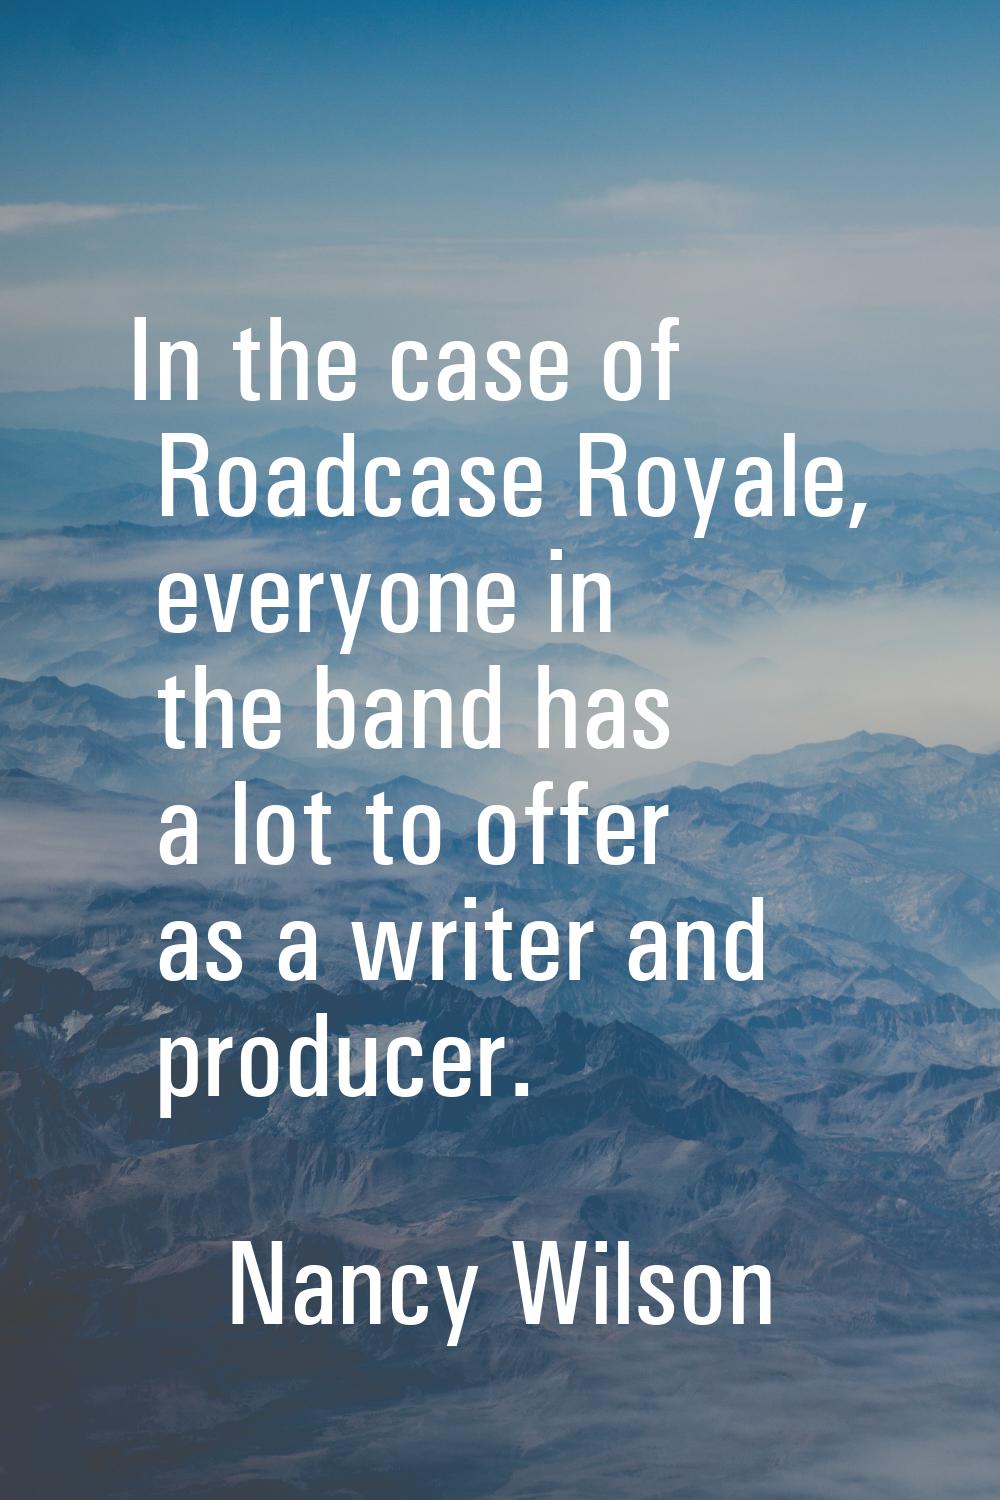 In the case of Roadcase Royale, everyone in the band has a lot to offer as a writer and producer.